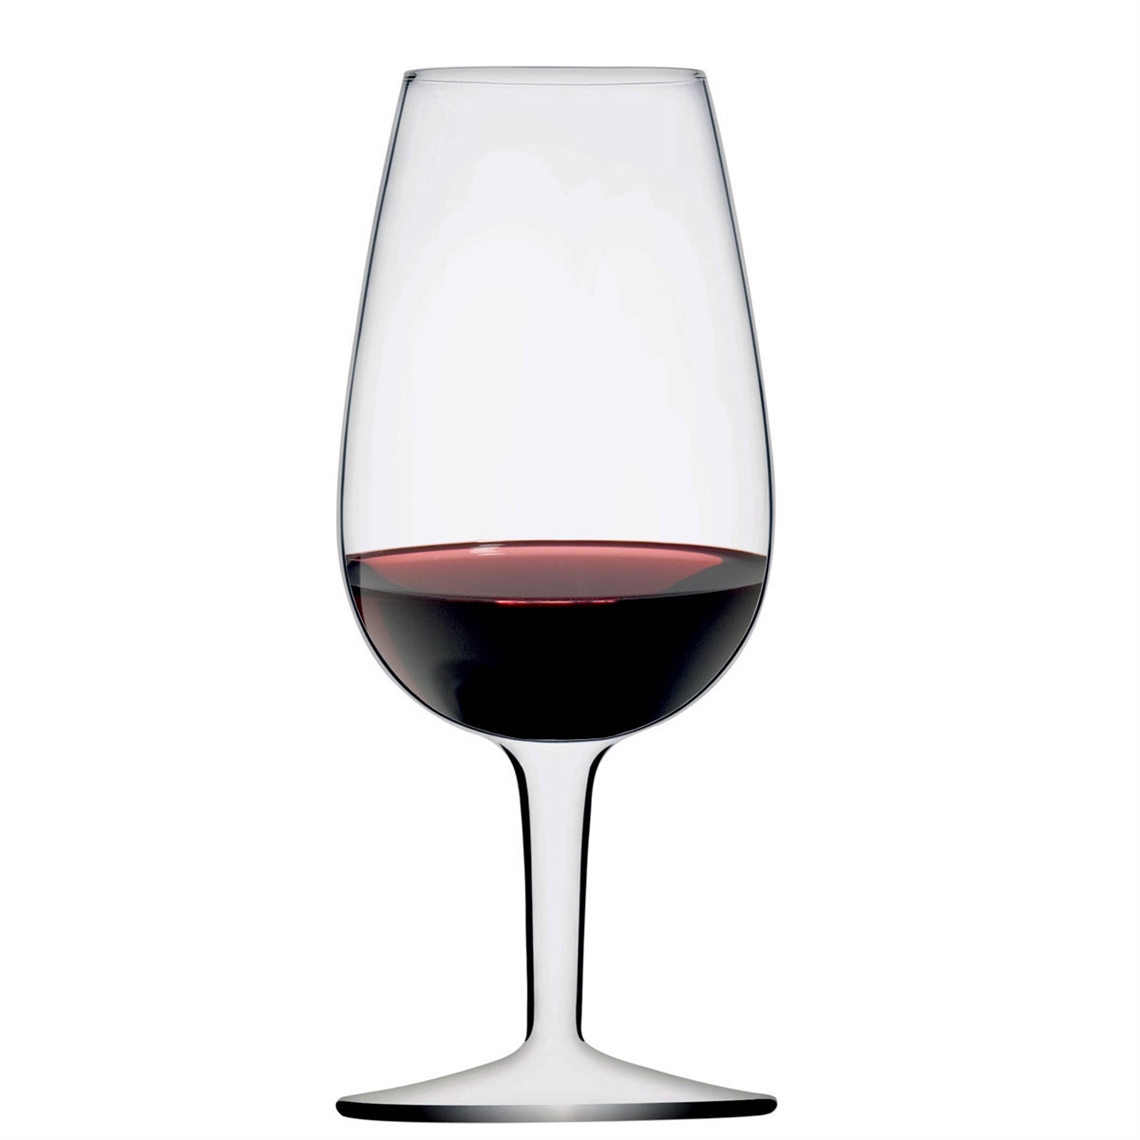 View more starlight from our Wine Tasting Glasses range